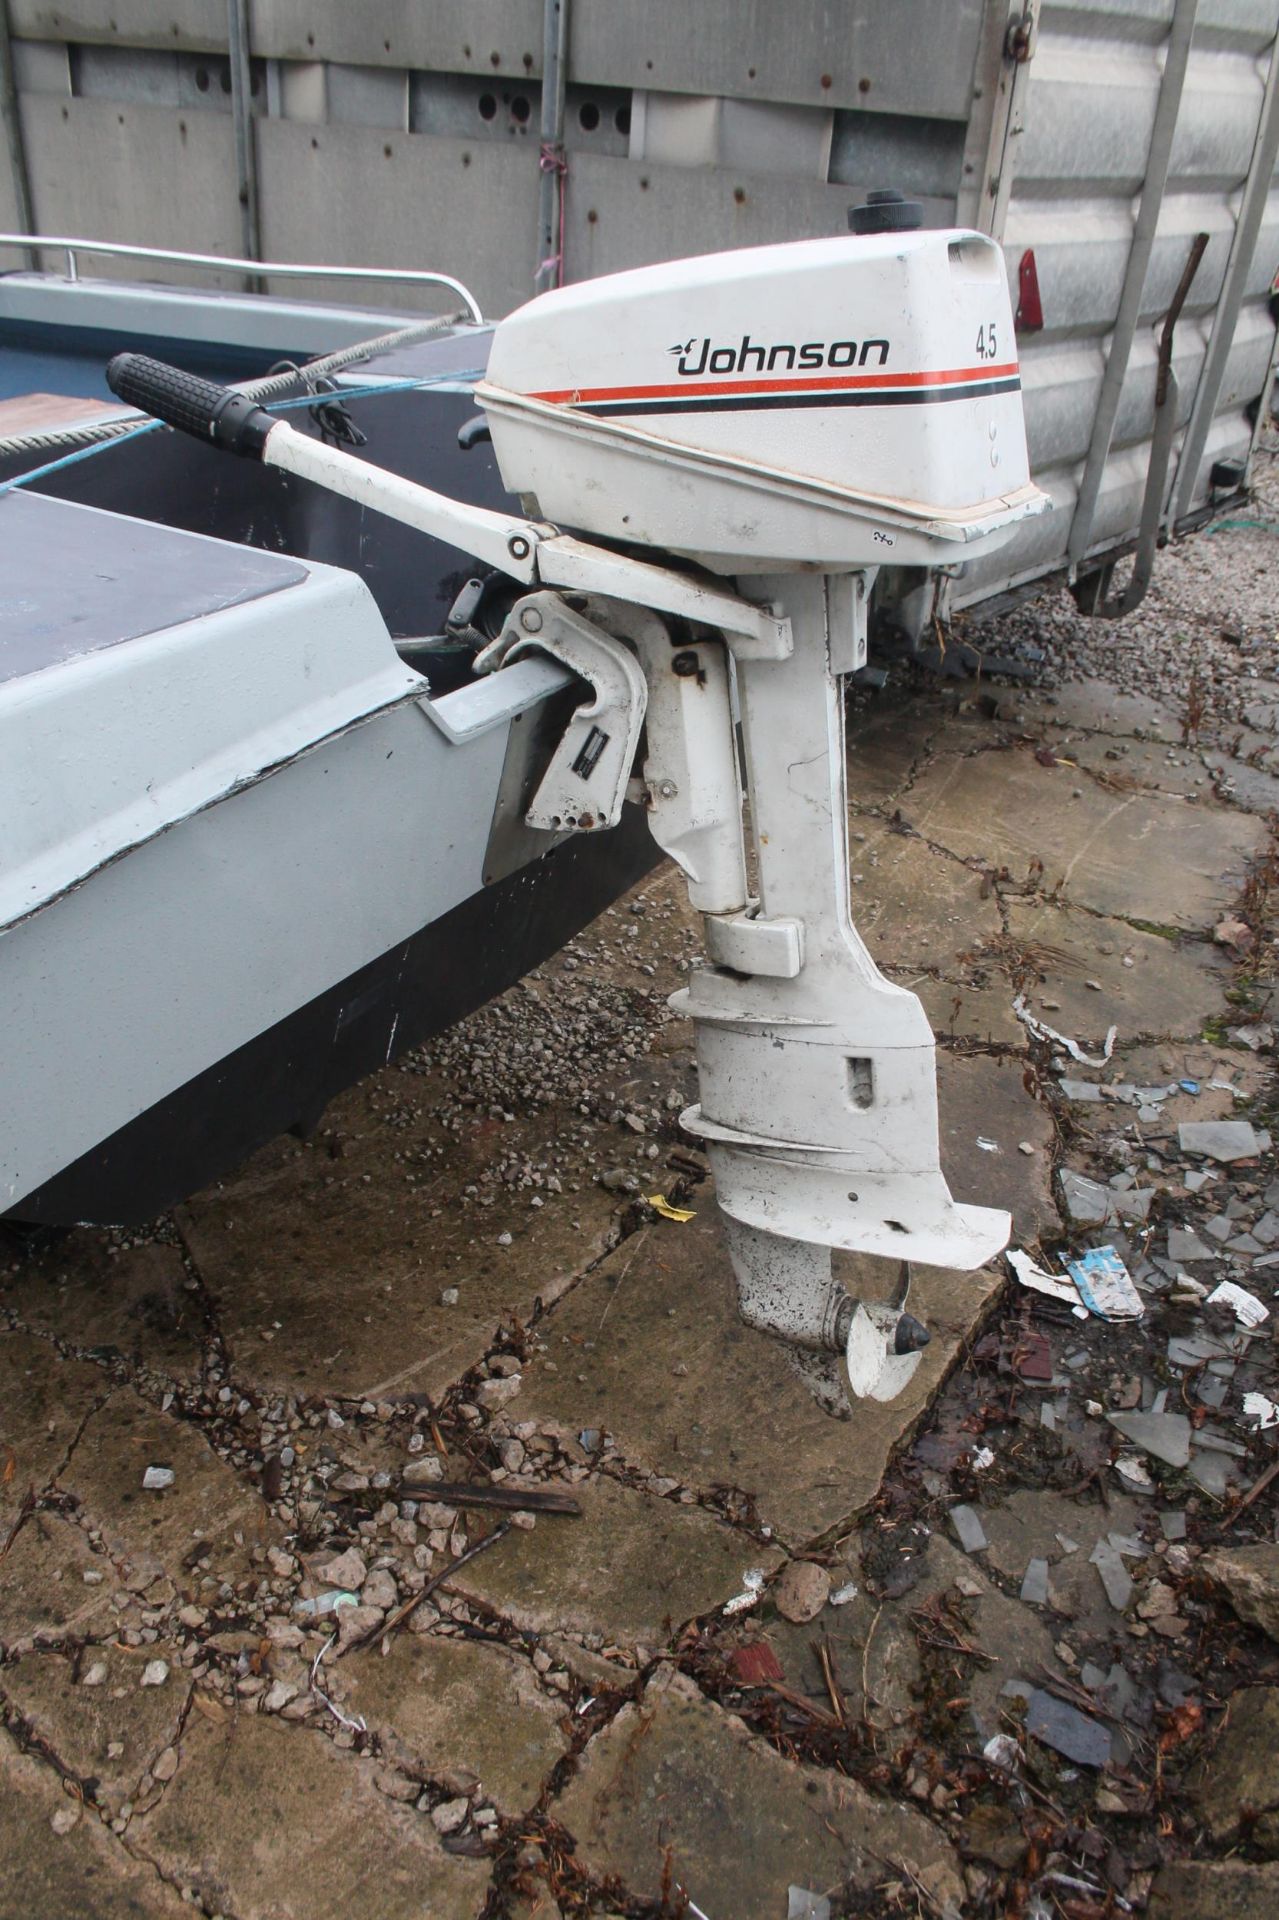 A 13 FOOT DORY CATHEDRAL FOAM FILLED HULL BOAT WITH JOHNSON SEA HORSE 4.5 OUTBOARD ENGINE, WHALE - Image 3 of 6